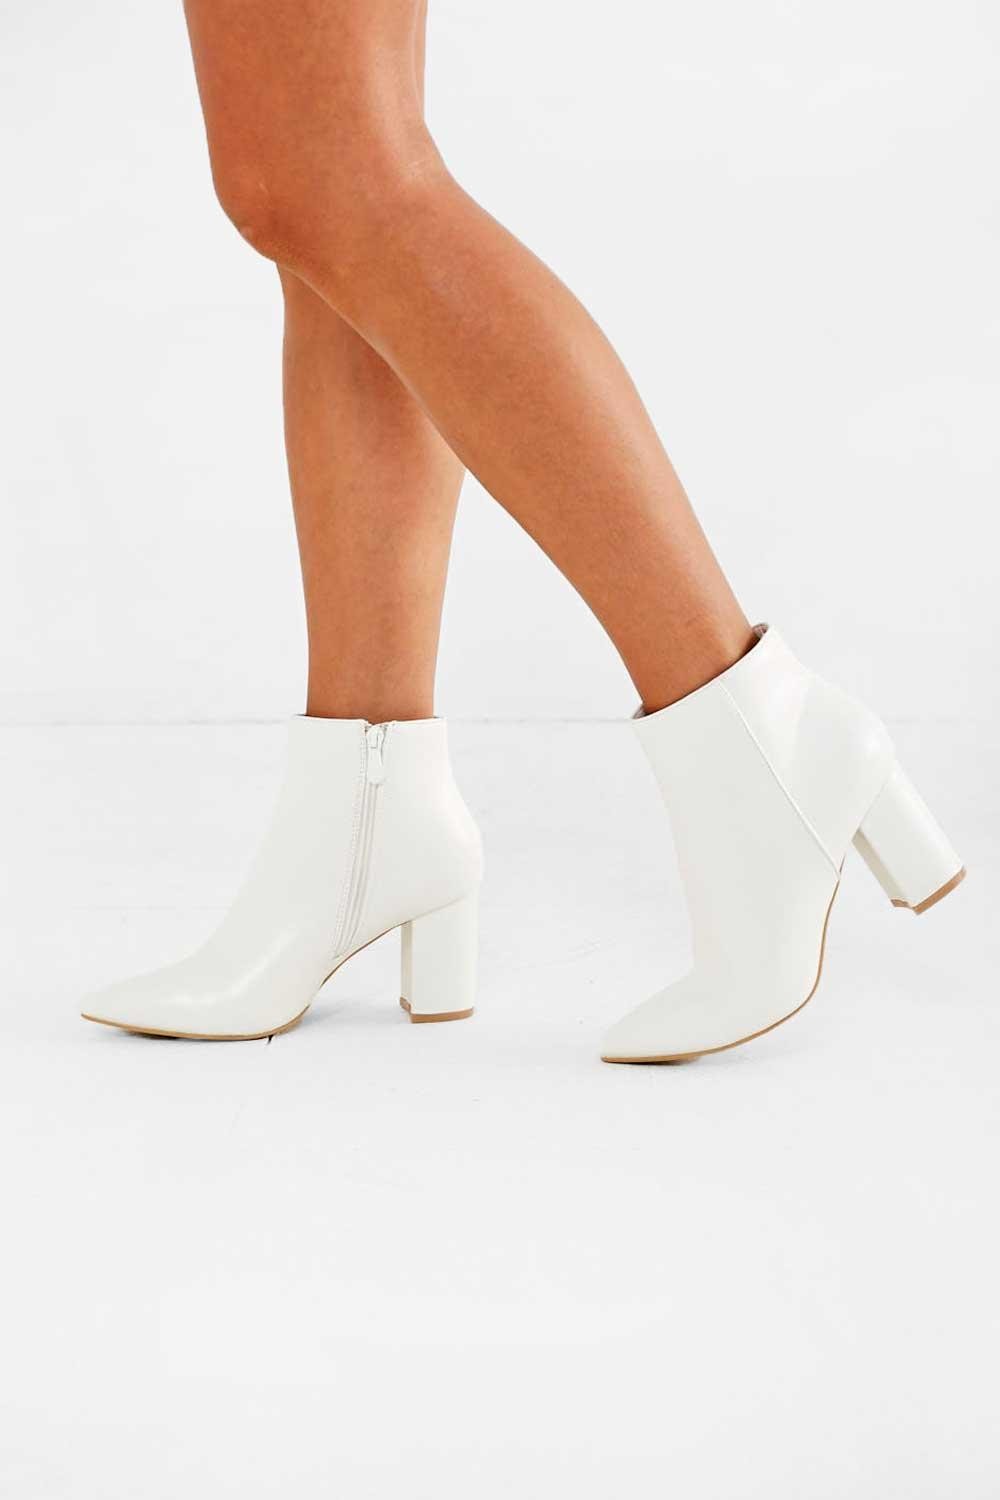 No Doubt Cassidy Pointed Toe Ankle Boot in White | iCLOTHING